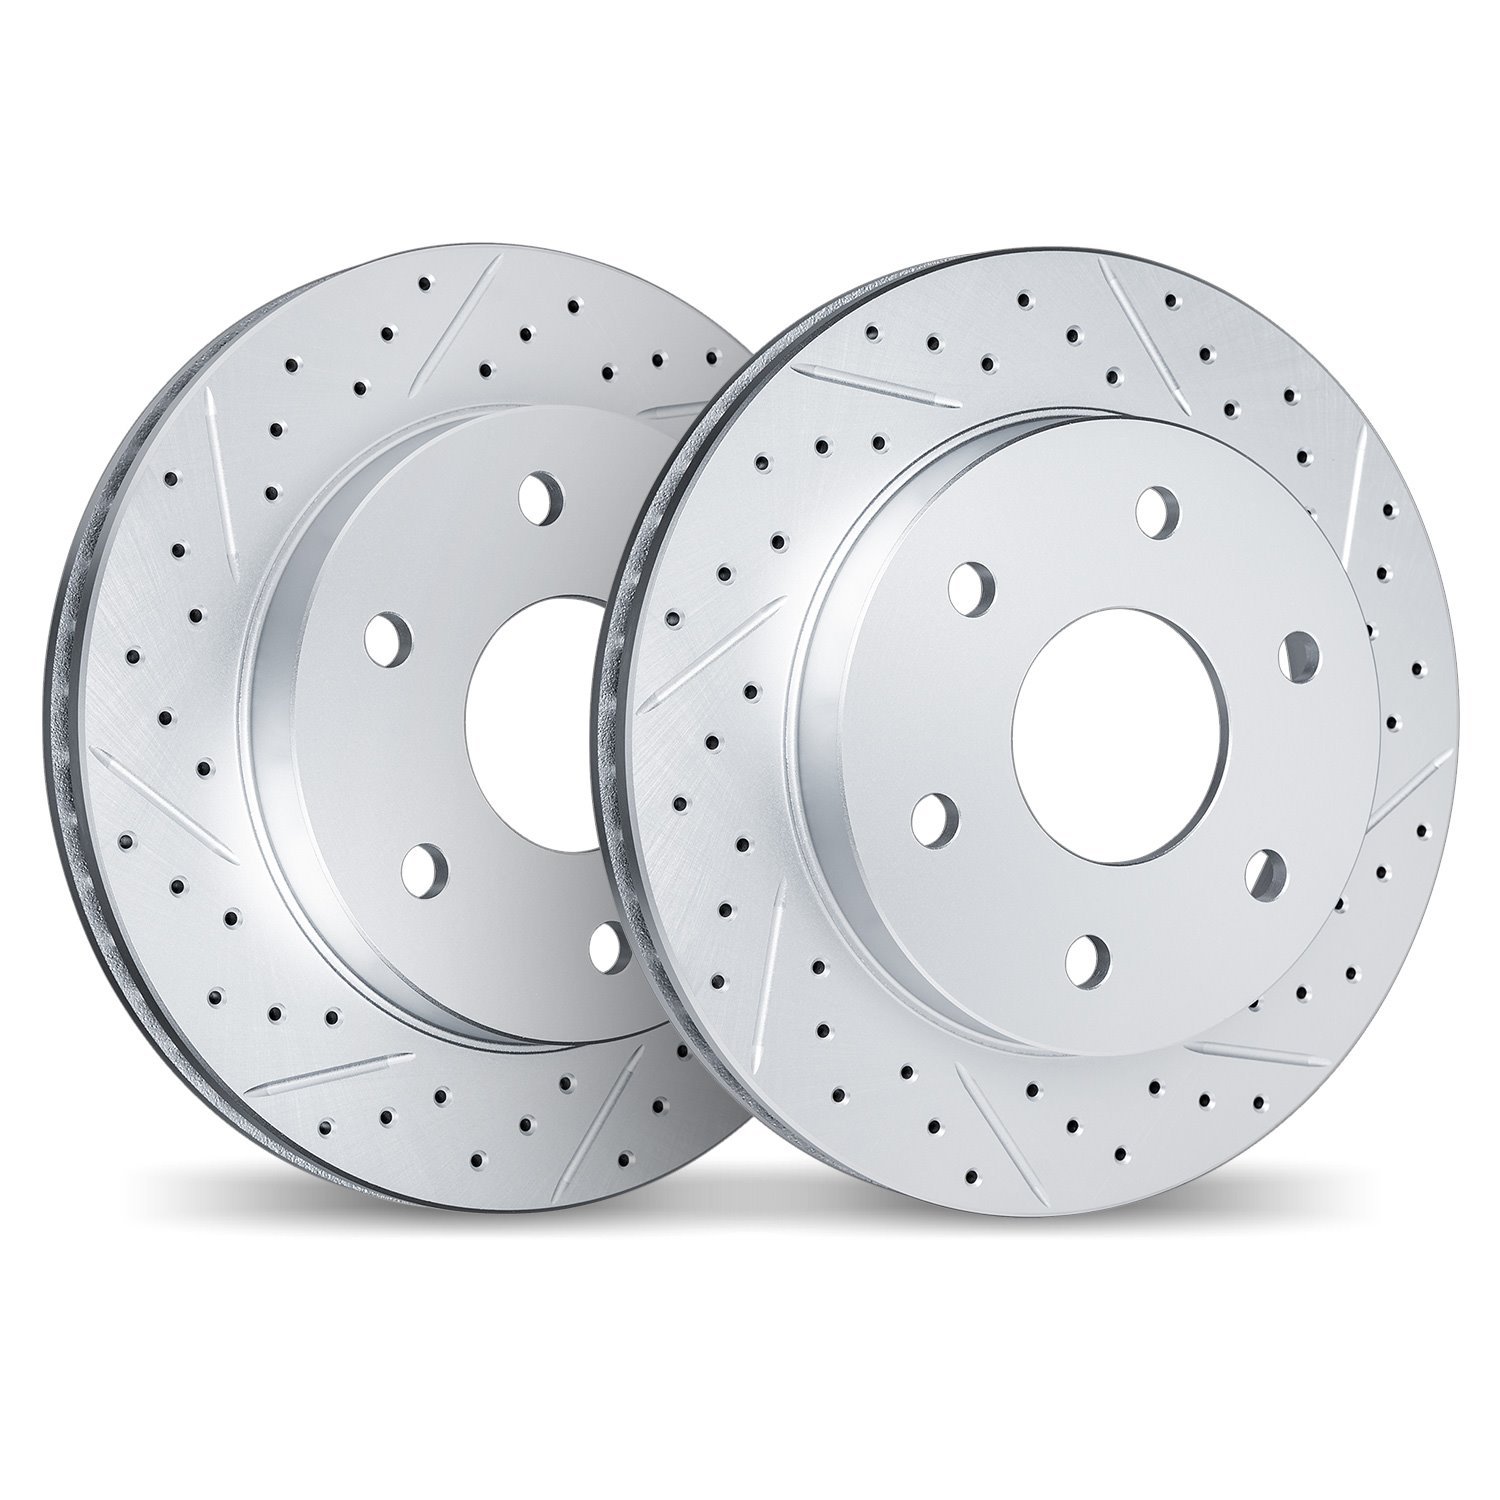 2002-47146 Geoperformance Drilled/Slotted Brake Rotors, Fits Select GM, Position: Rear